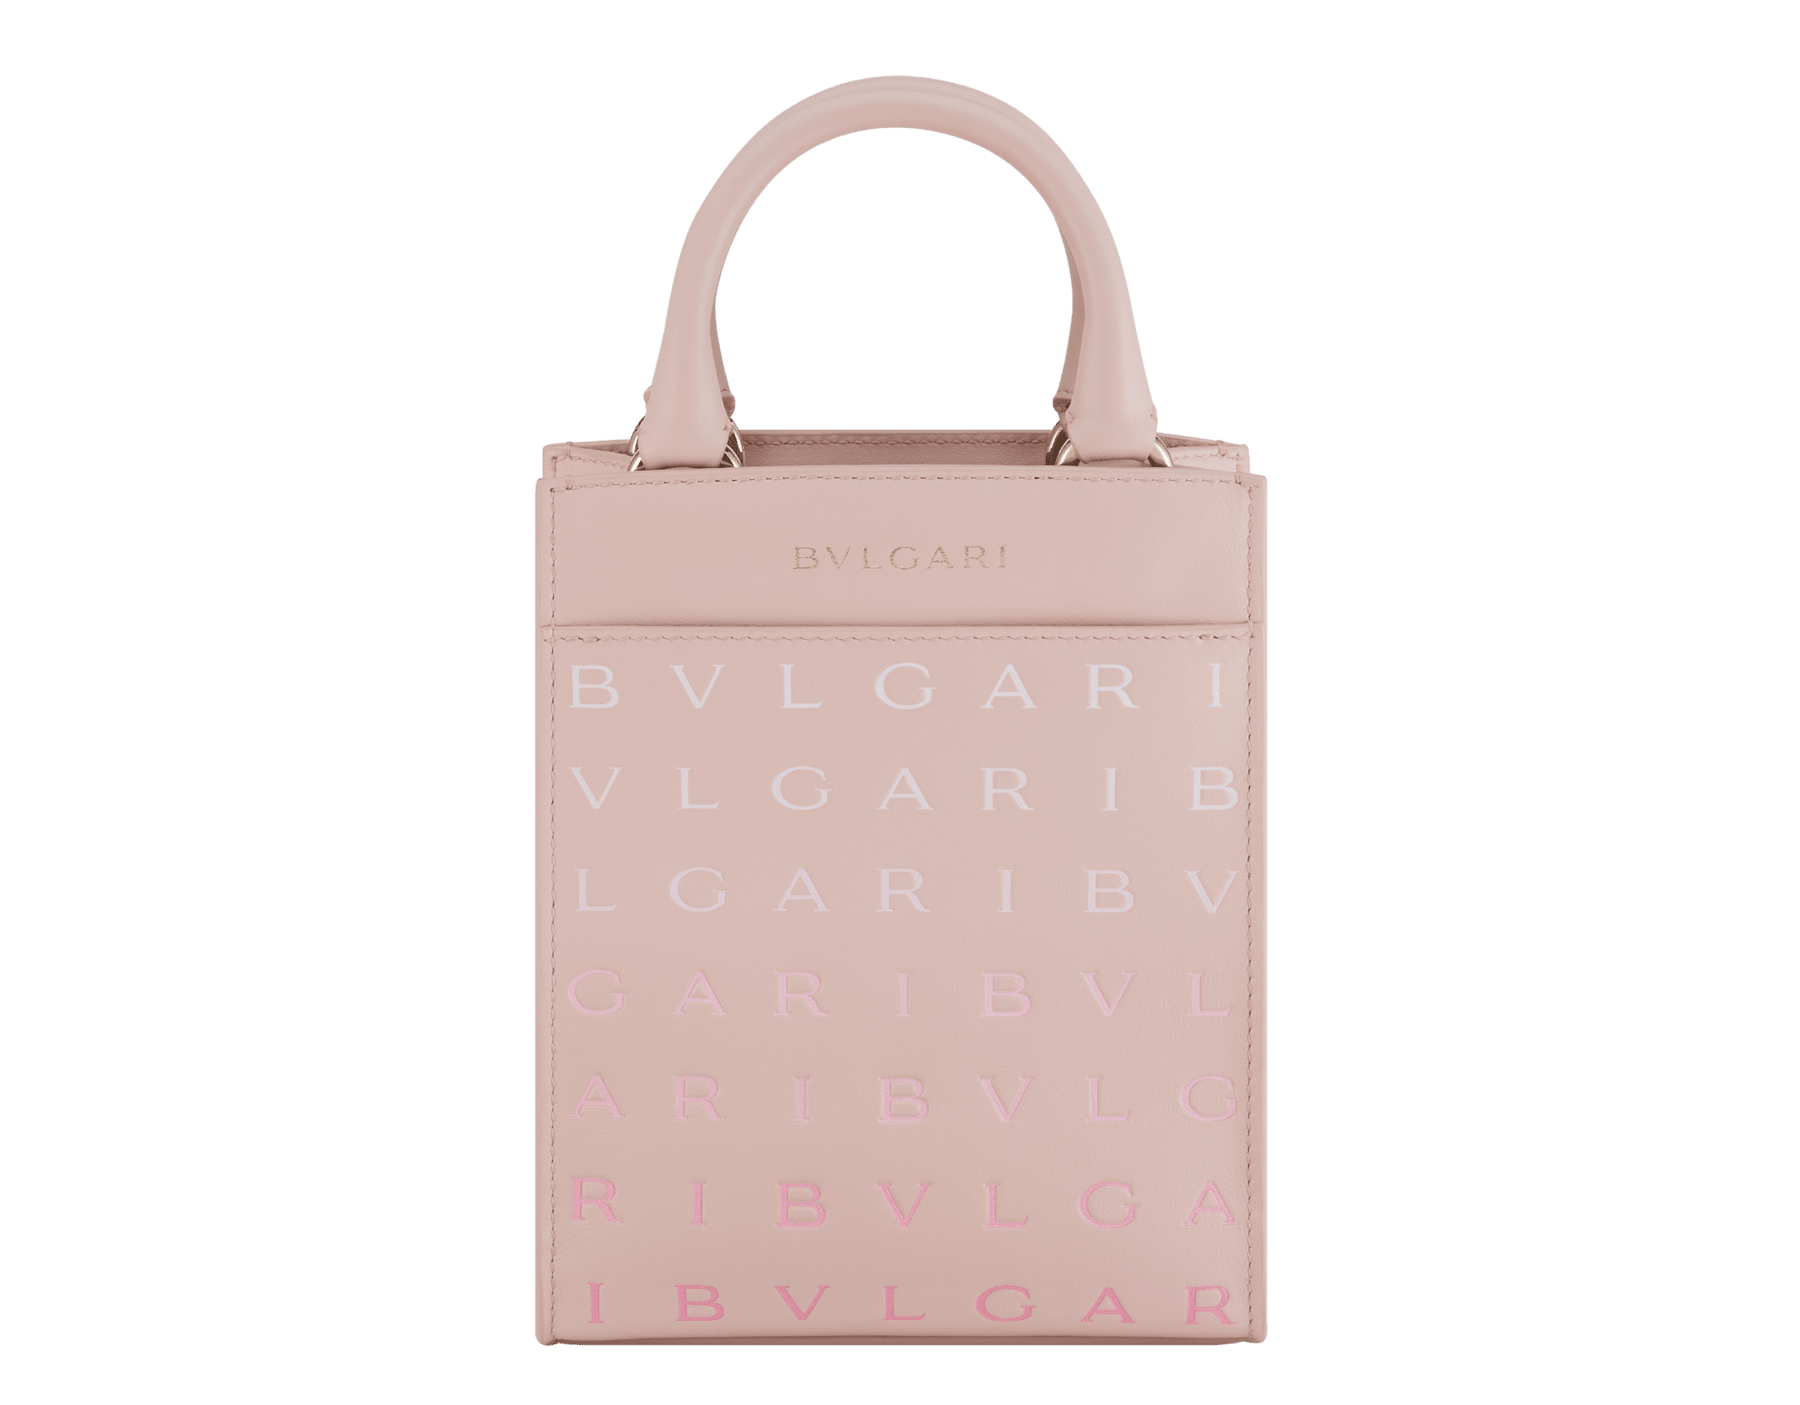 Bulgari Logo mini tote bag in ivory opal calf leather with hot-stamped Infinitum pattern on the front and black grosgrain lining. Light gold-plated brass hardware. BVL-1228S-ICLb image 1